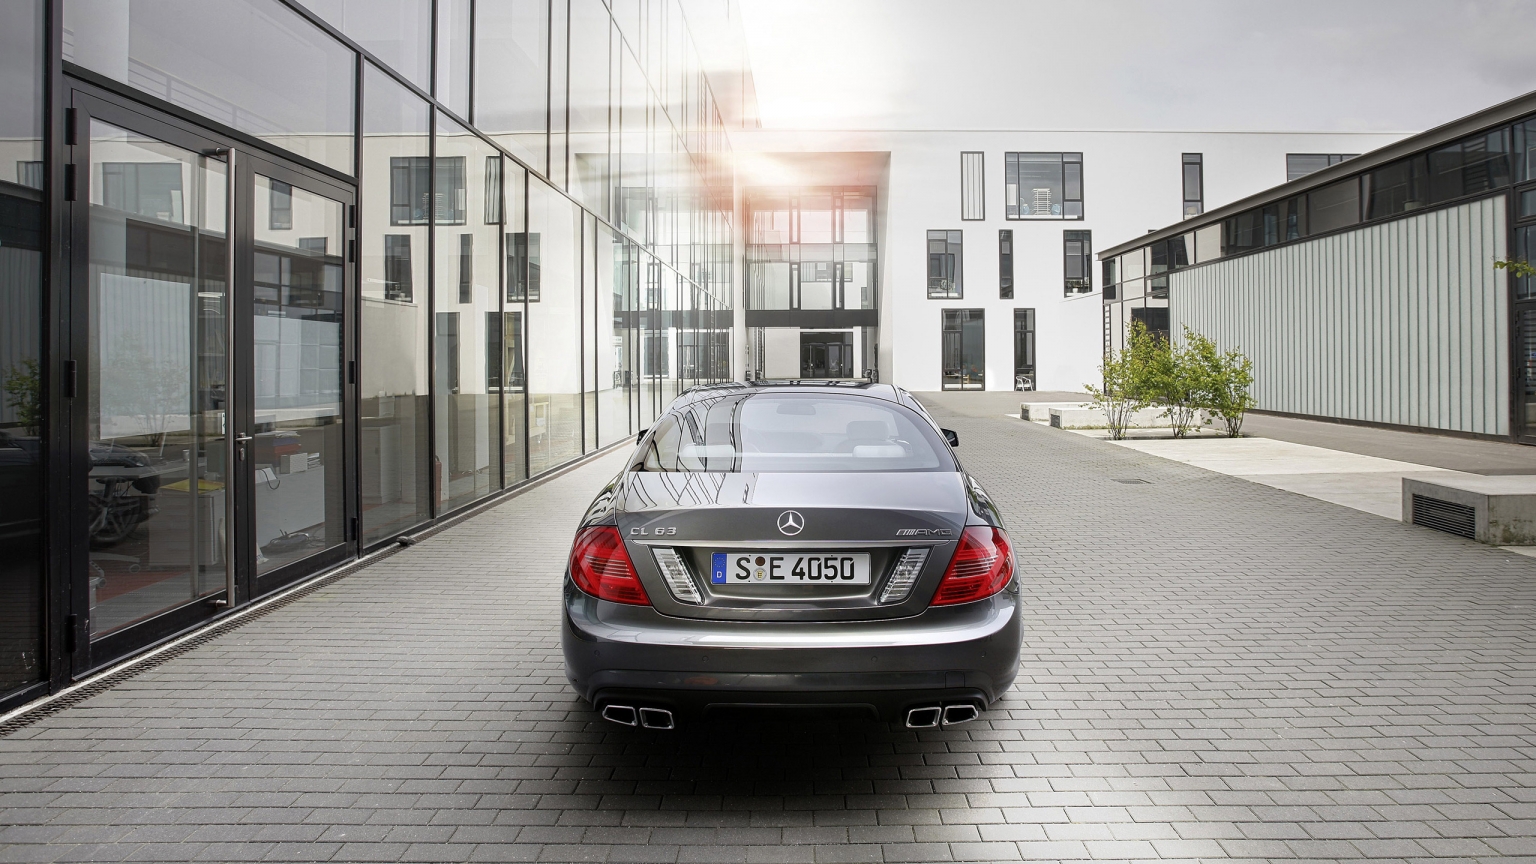 Mercedes CL63 AMG 2011 Rear for 1536 x 864 HDTV resolution